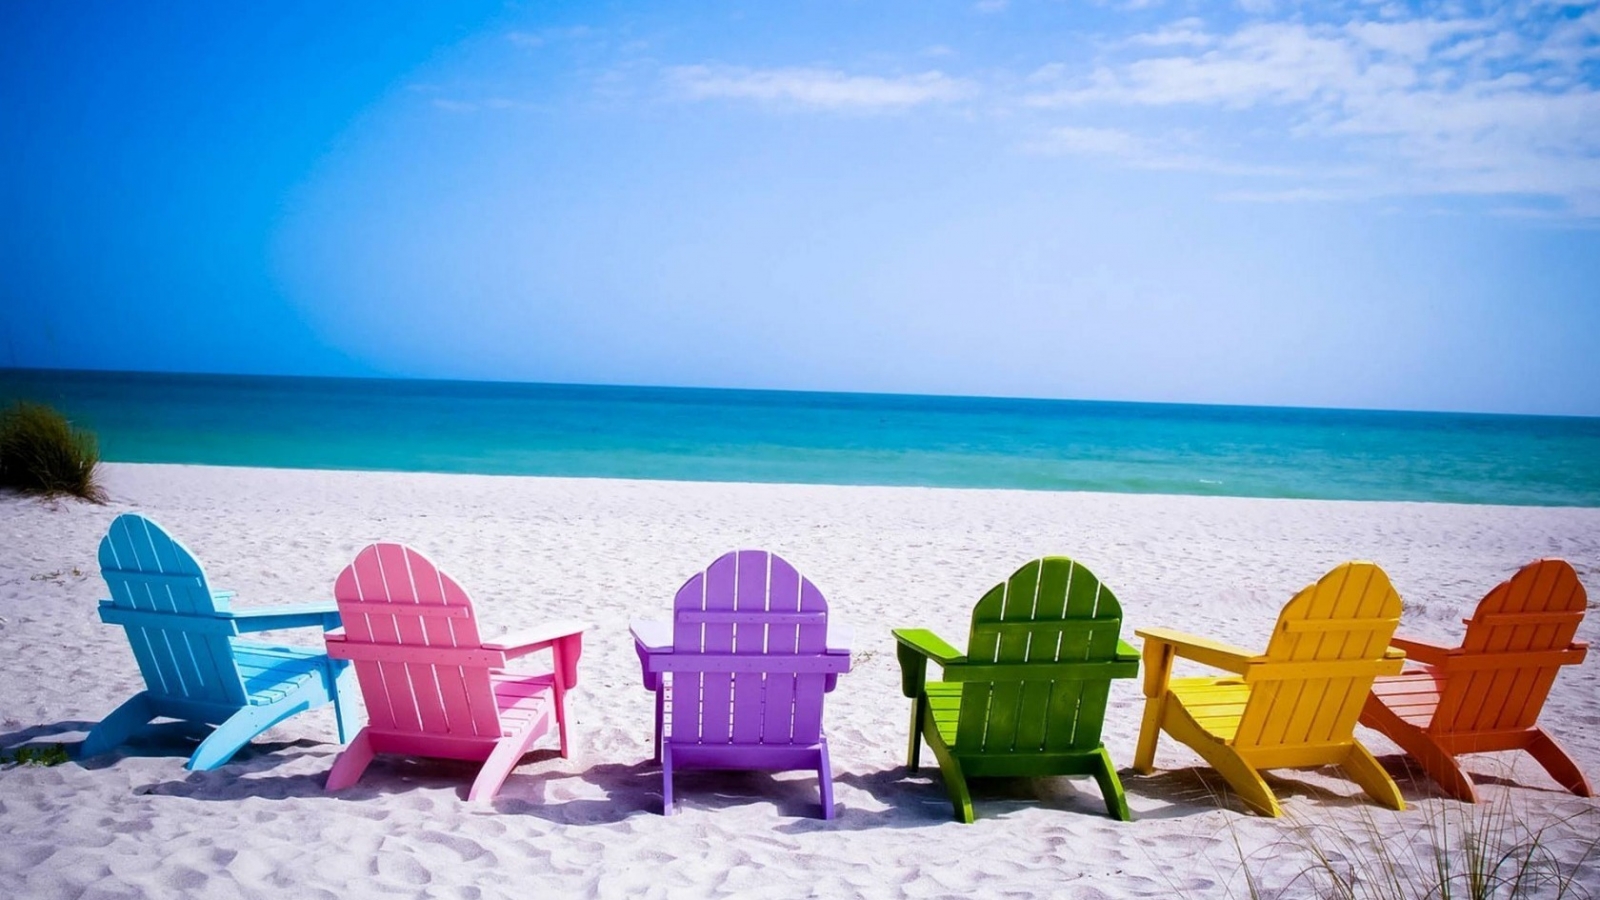 Colorful Beach Chairs Wallpaper for 1600 x 900 HDTV resolution